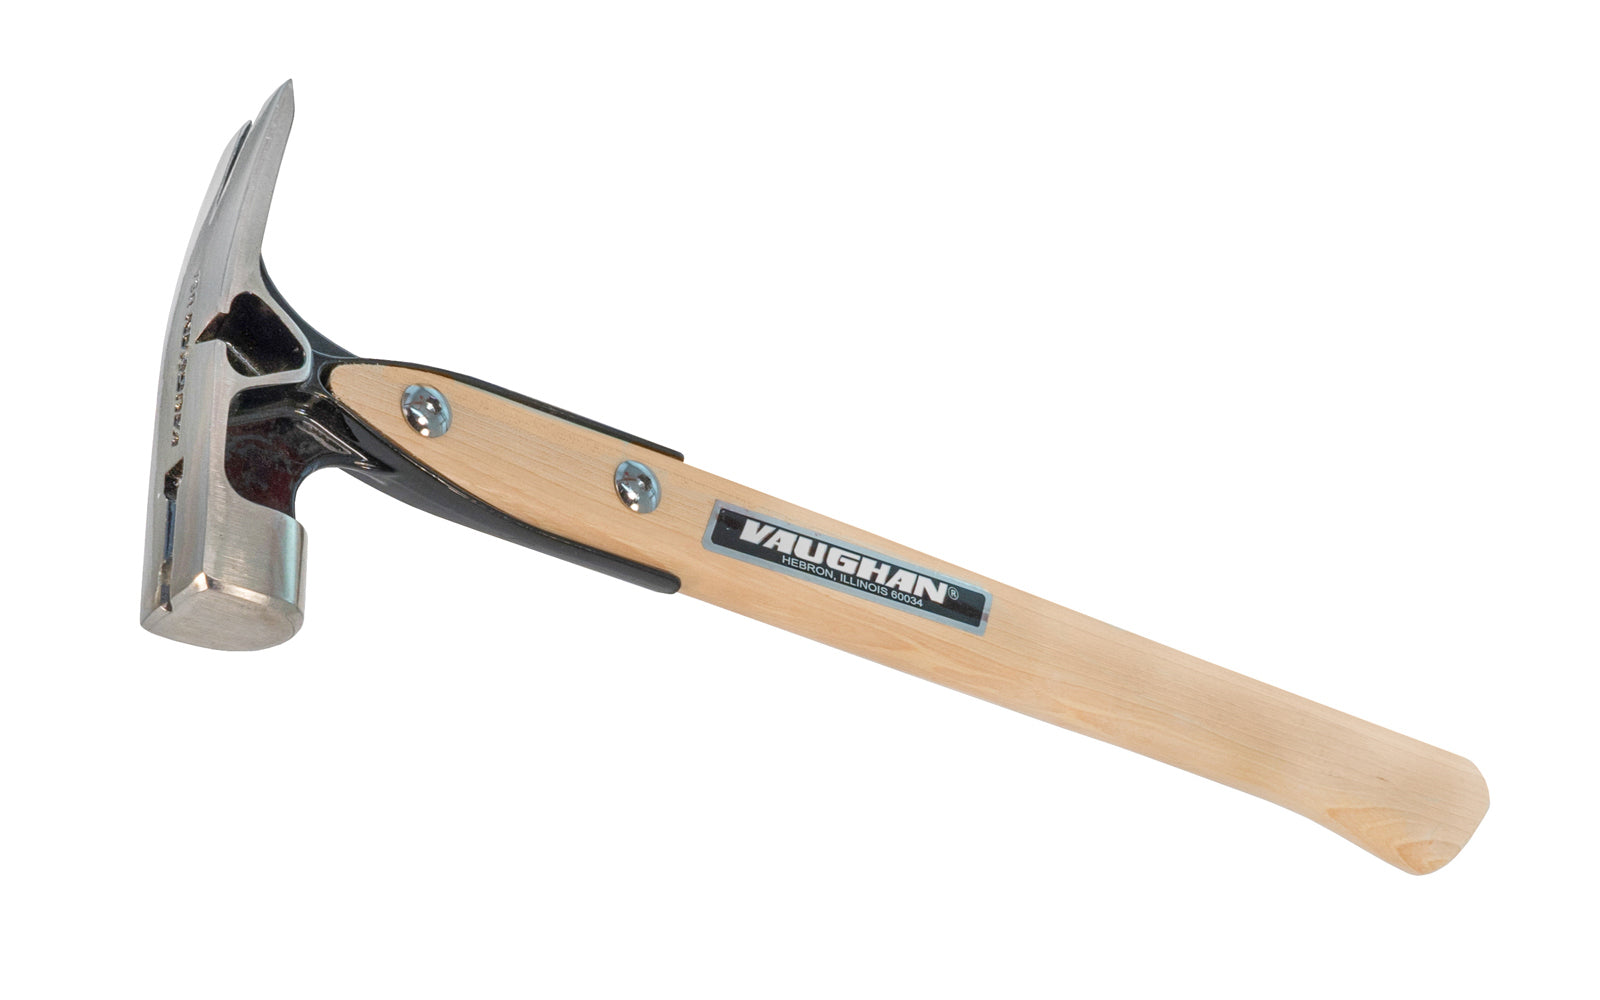 This 18 oz Smooth face Vaughan hammer has a steel head with overstrike guard. A magnetic nail holder for one handed nail starting while the sidewinder nail puller provides extra leverage for removing nails without ripping up forms. Smooth face. Straight Hickory hardwood handle.  051218072822. VW18P. Made in USA